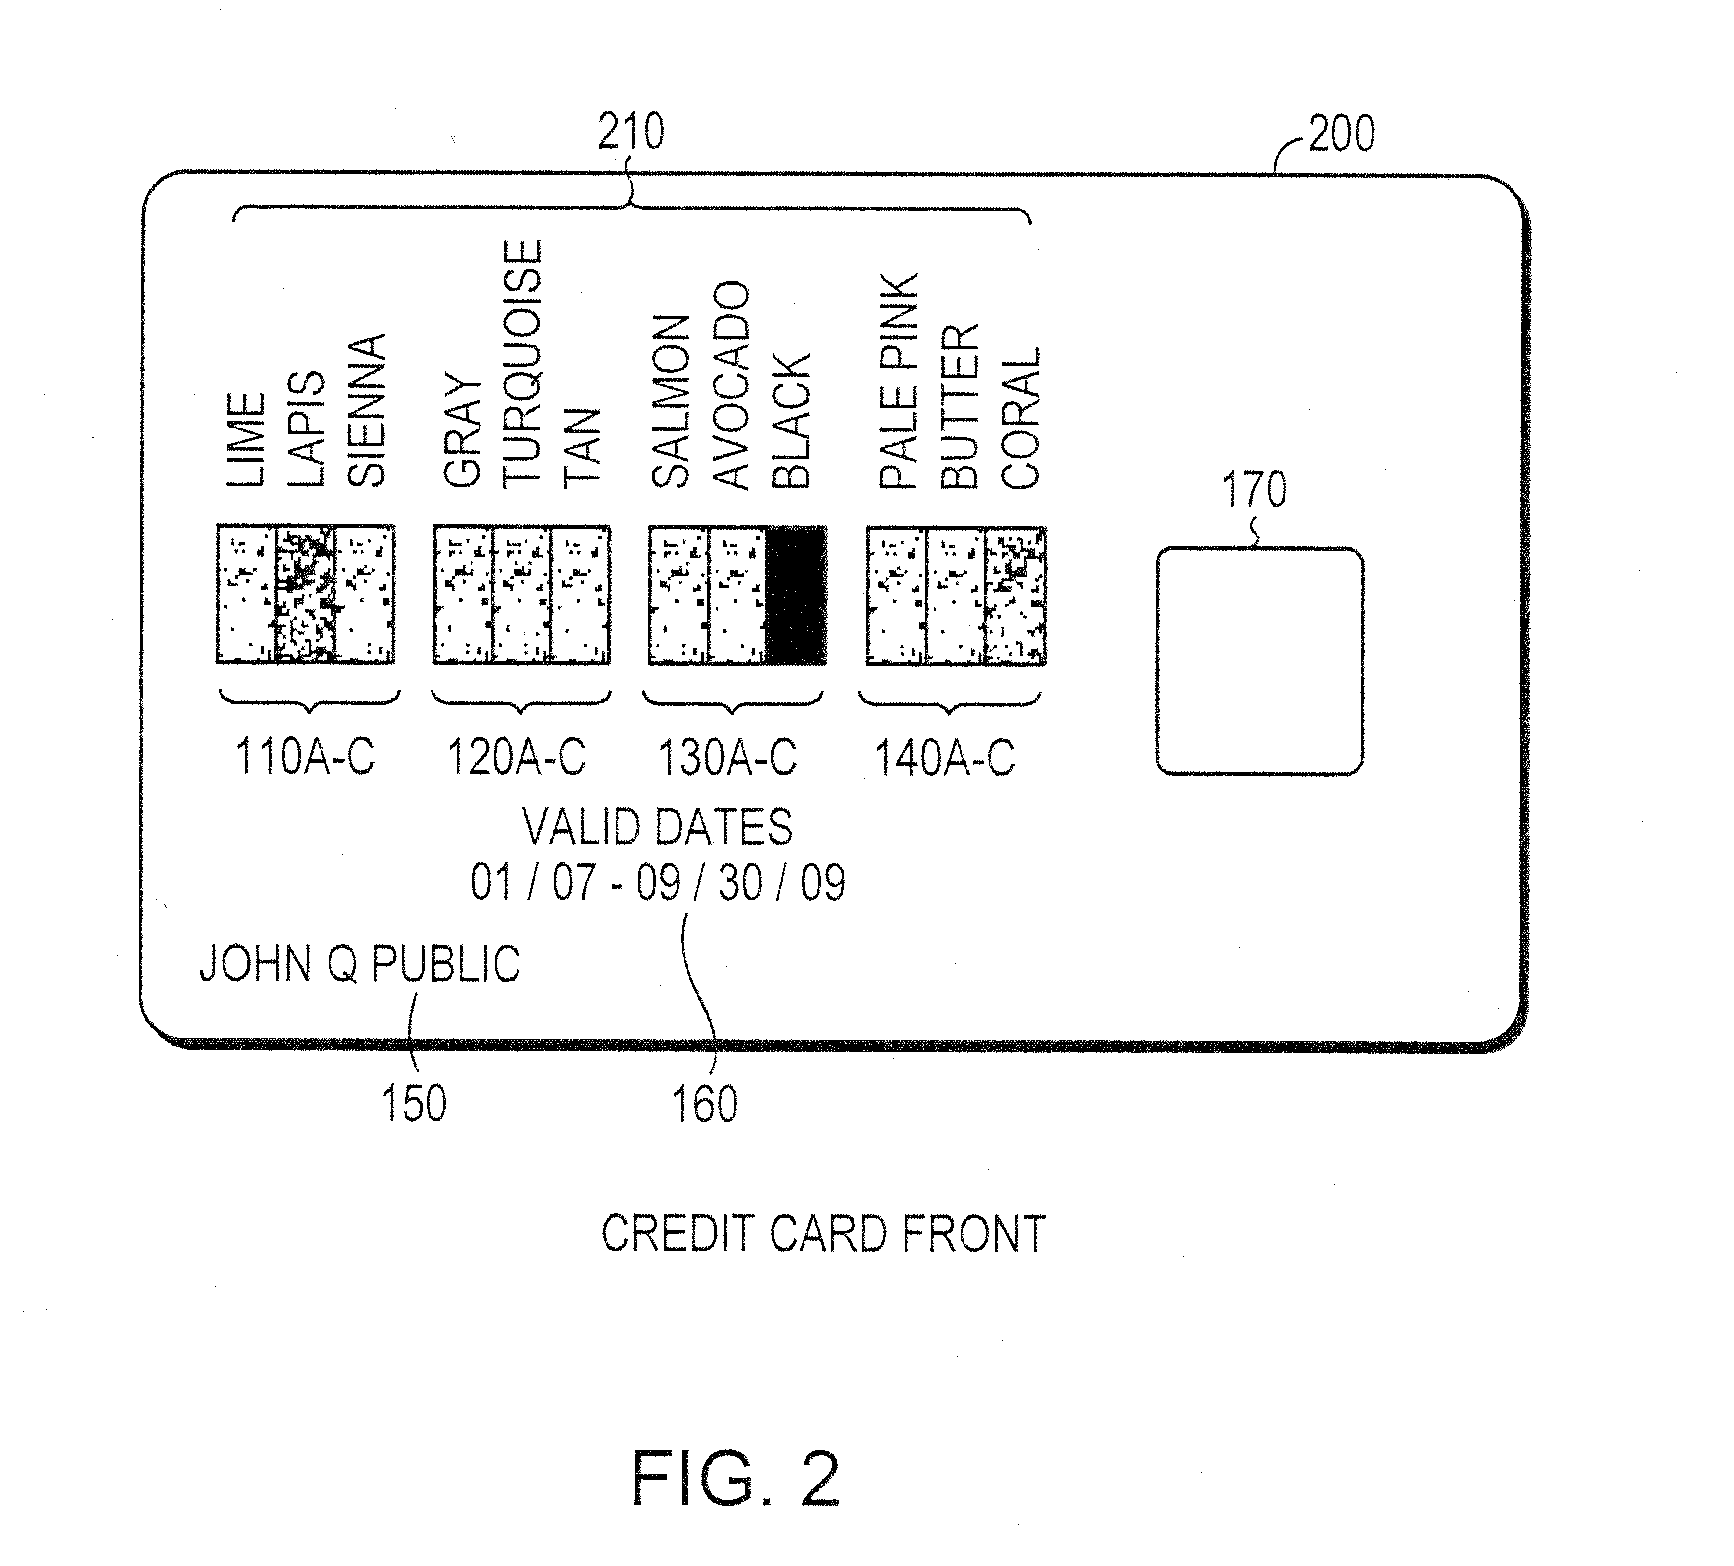 System and method for controlling secured transaction using color coded account identifiers